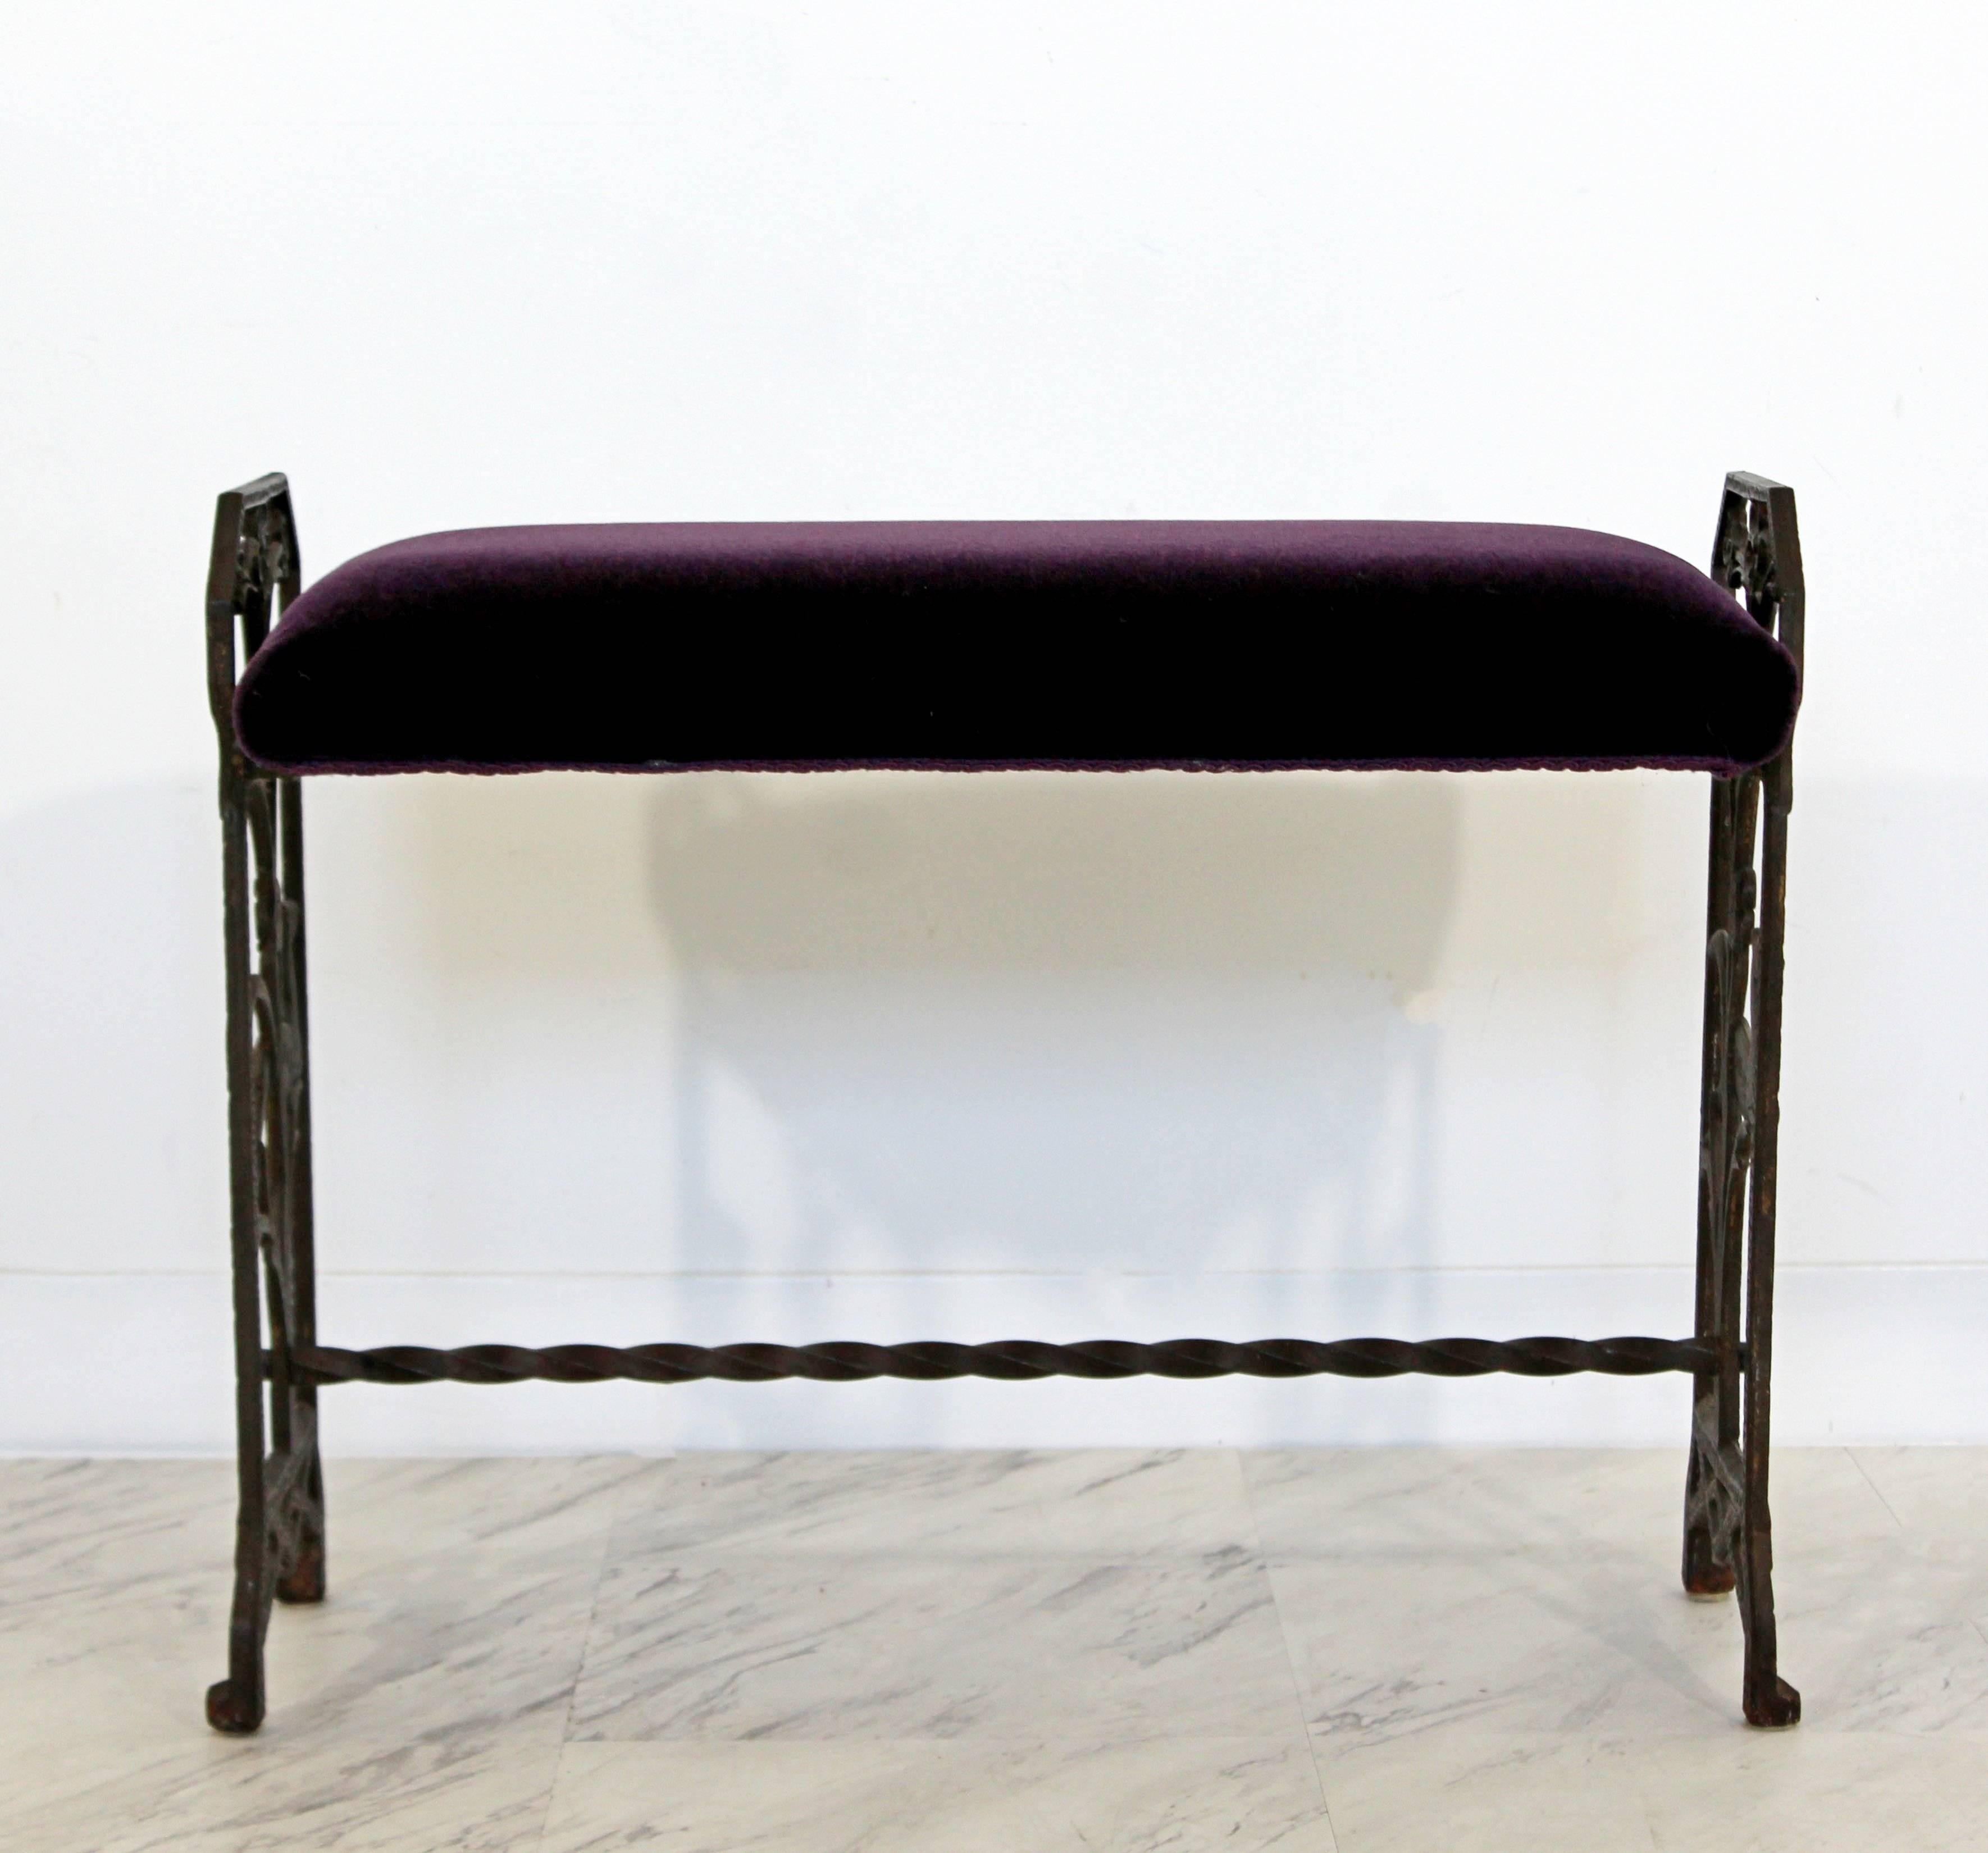 For your consideration is a stunning, wrought iron, Art Deco bench, with a dark purple velvet seat and beautifully detailed sides. In excellent condition. The dimensions are 25